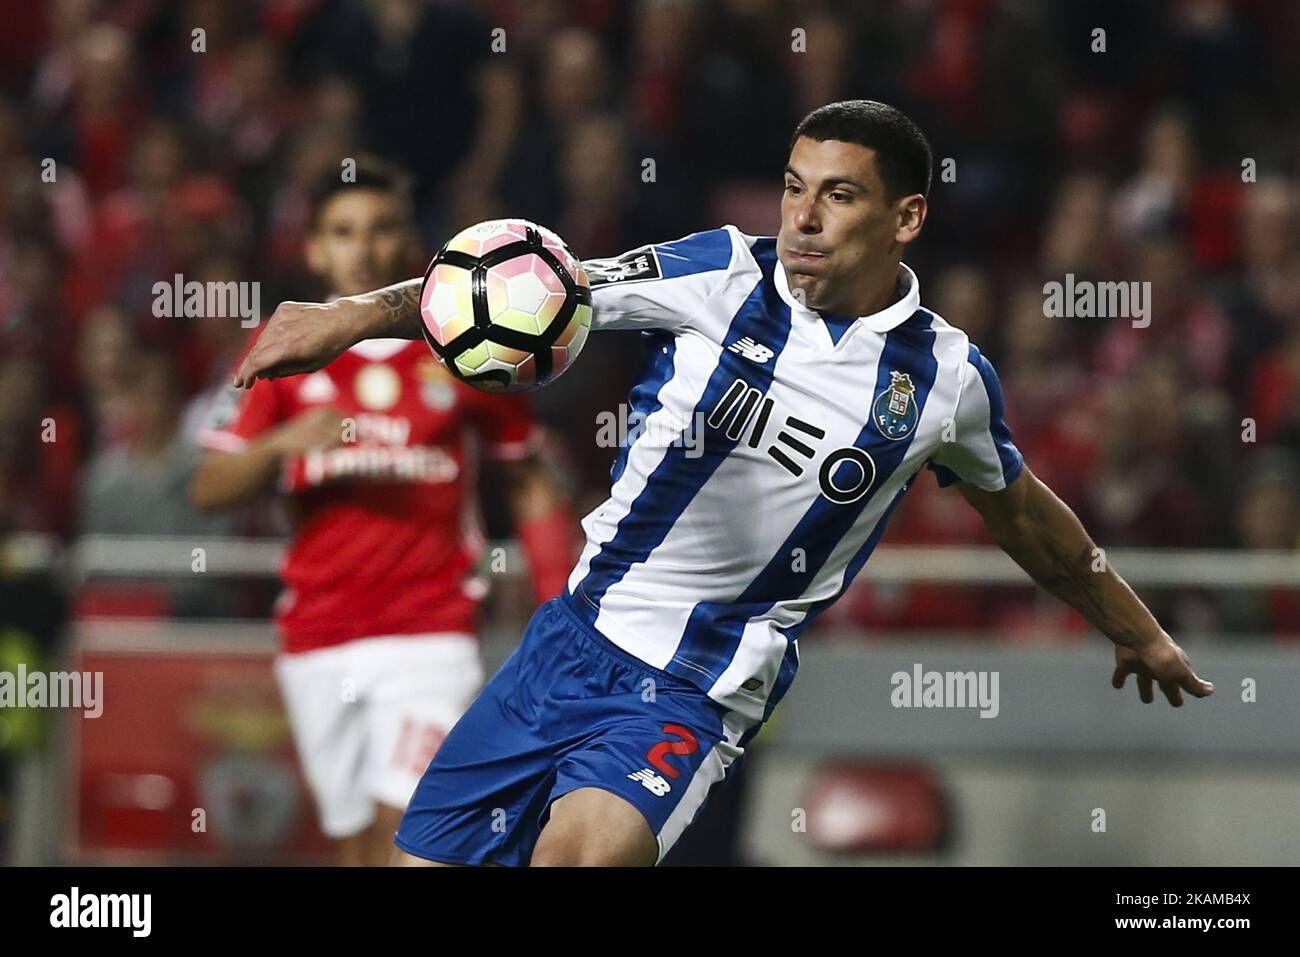 Porto's defender Maxi Pereira scores his team's goal during Premier League 2016/17 match between SL Benfica vs FC Porto, in Lisbon, on April 1, 2017. (Photo by Carlos Palma/NurPhoto) *** Please Use Credit from Credit Field *** Stock Photo